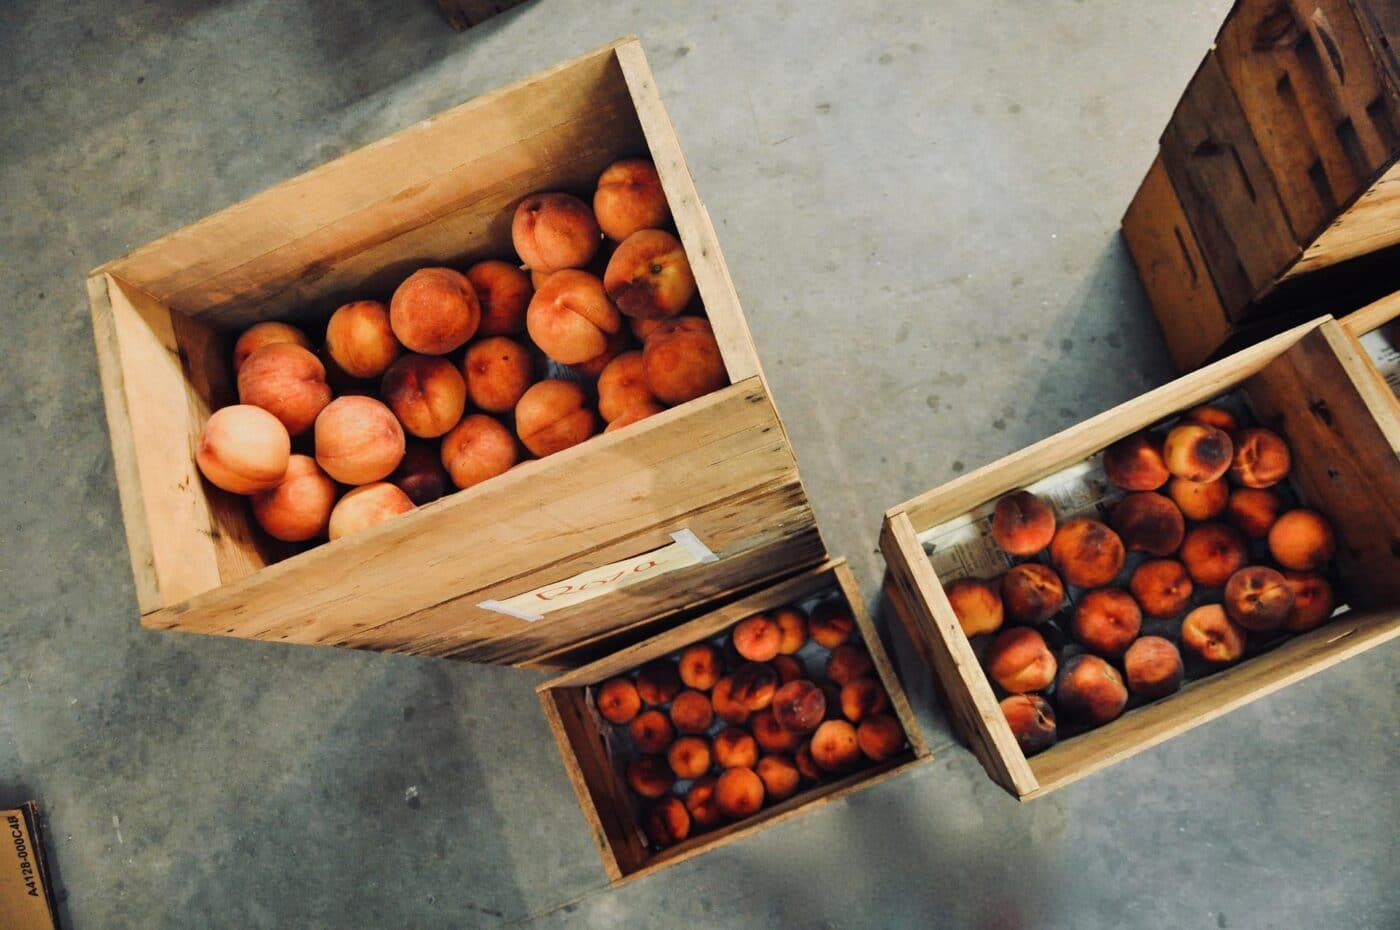 Peaches in boxes at a farmers market